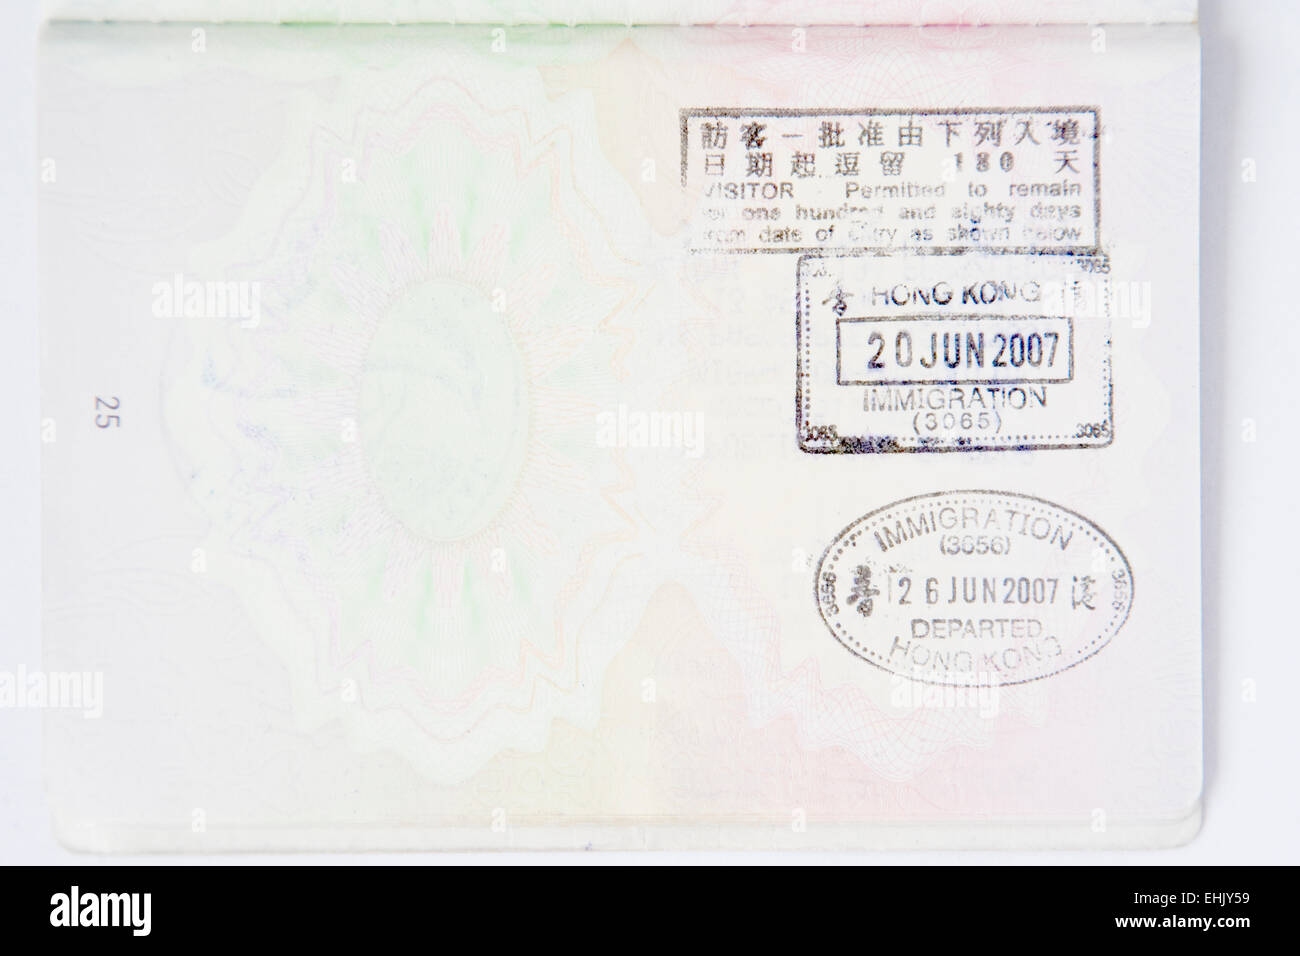 Passport Stamps from Hong Kong Stock Photo